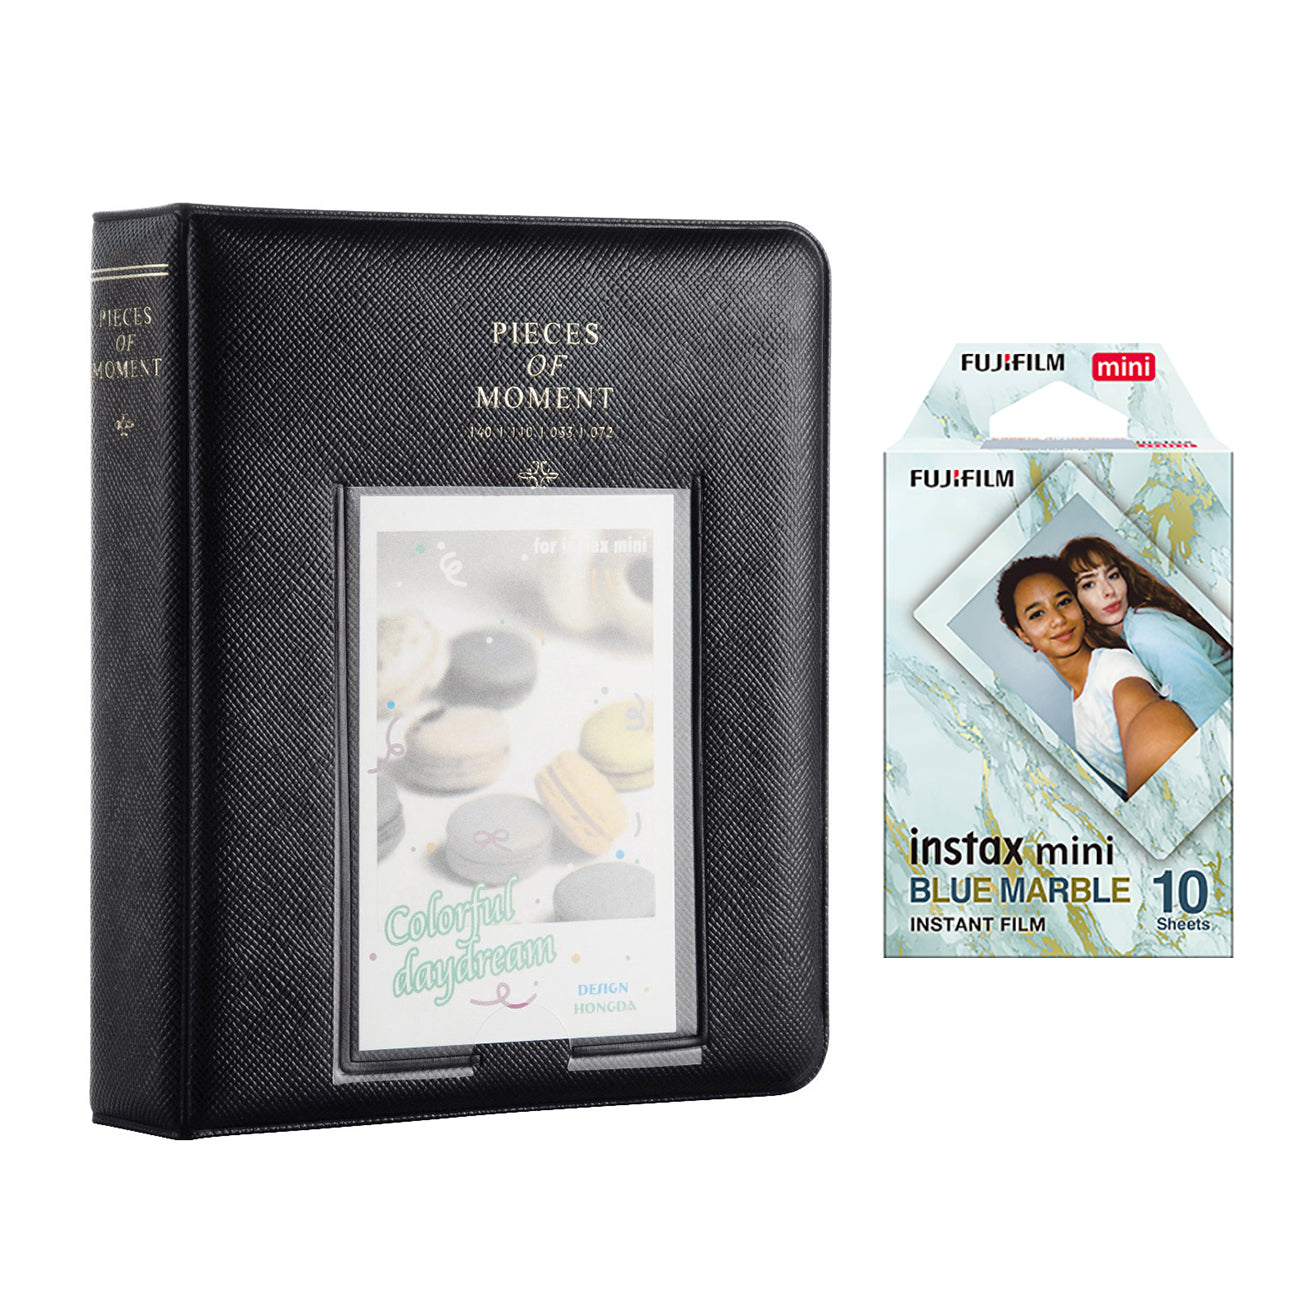 Fujifilm Instax Mini 10X1 blue marble Instant Film with Instax Time Photo Album 64 Sheets (charcoal grey)